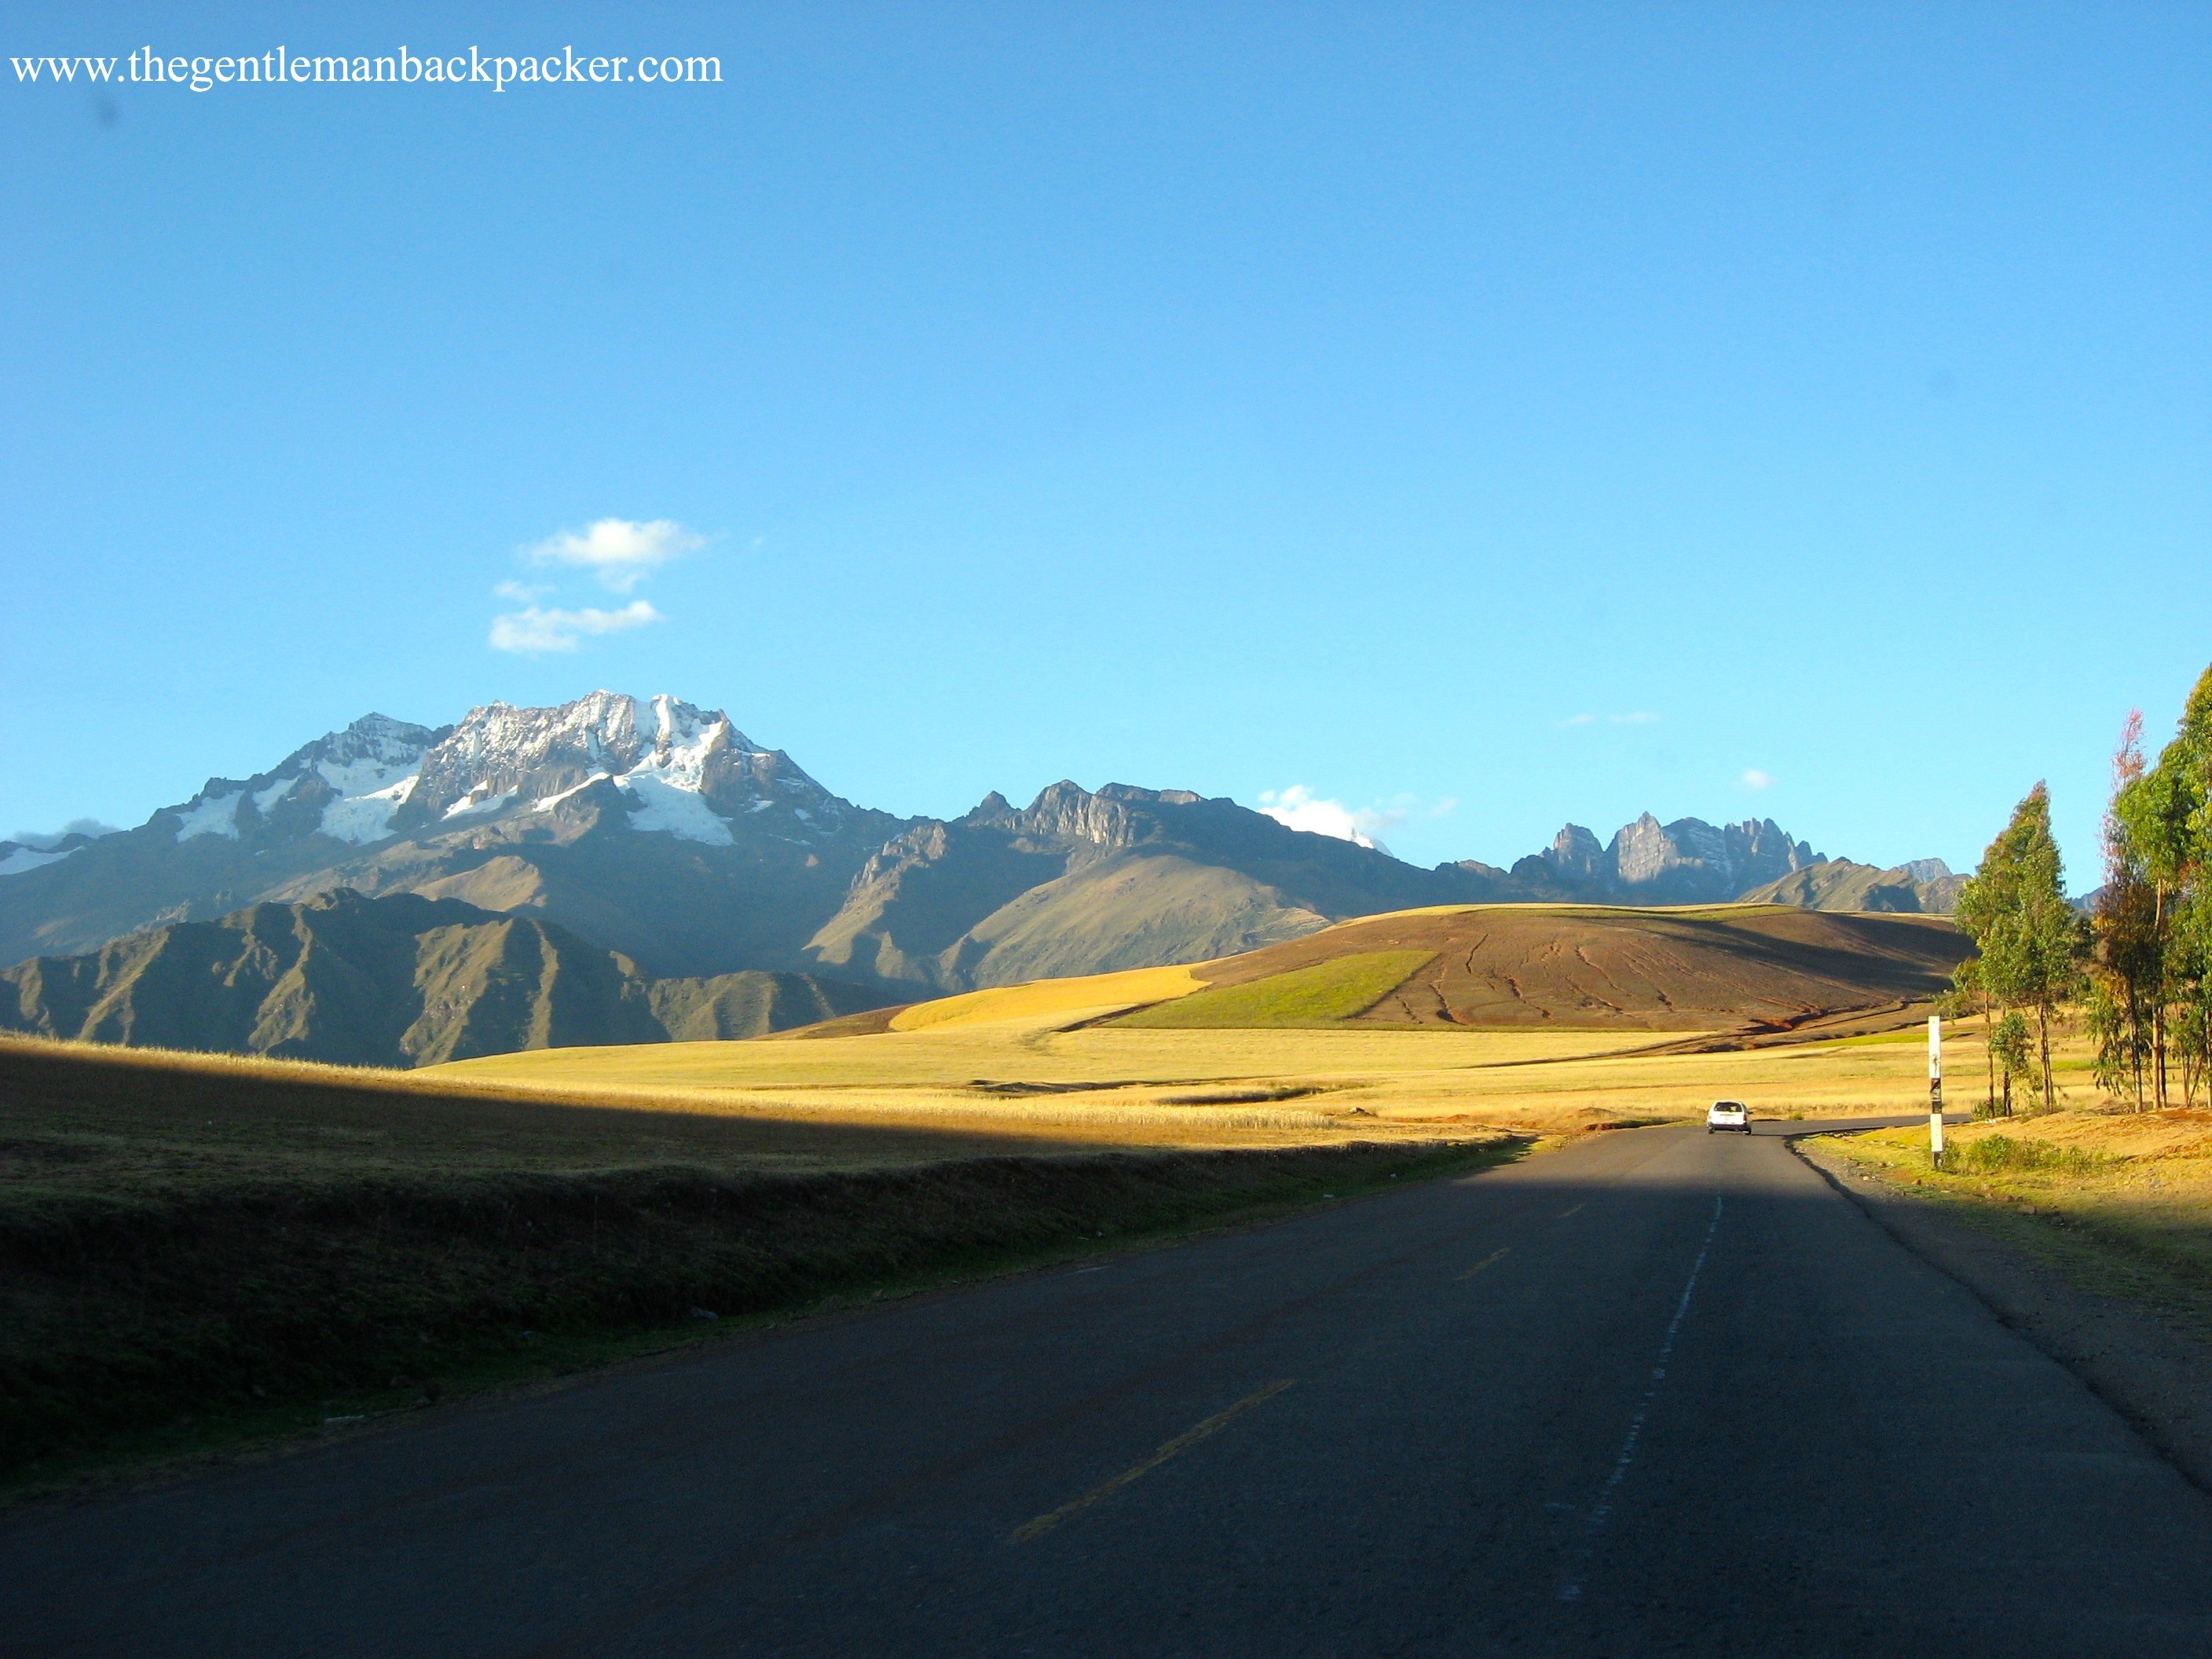 Driving through the Sacred Valley of Peru